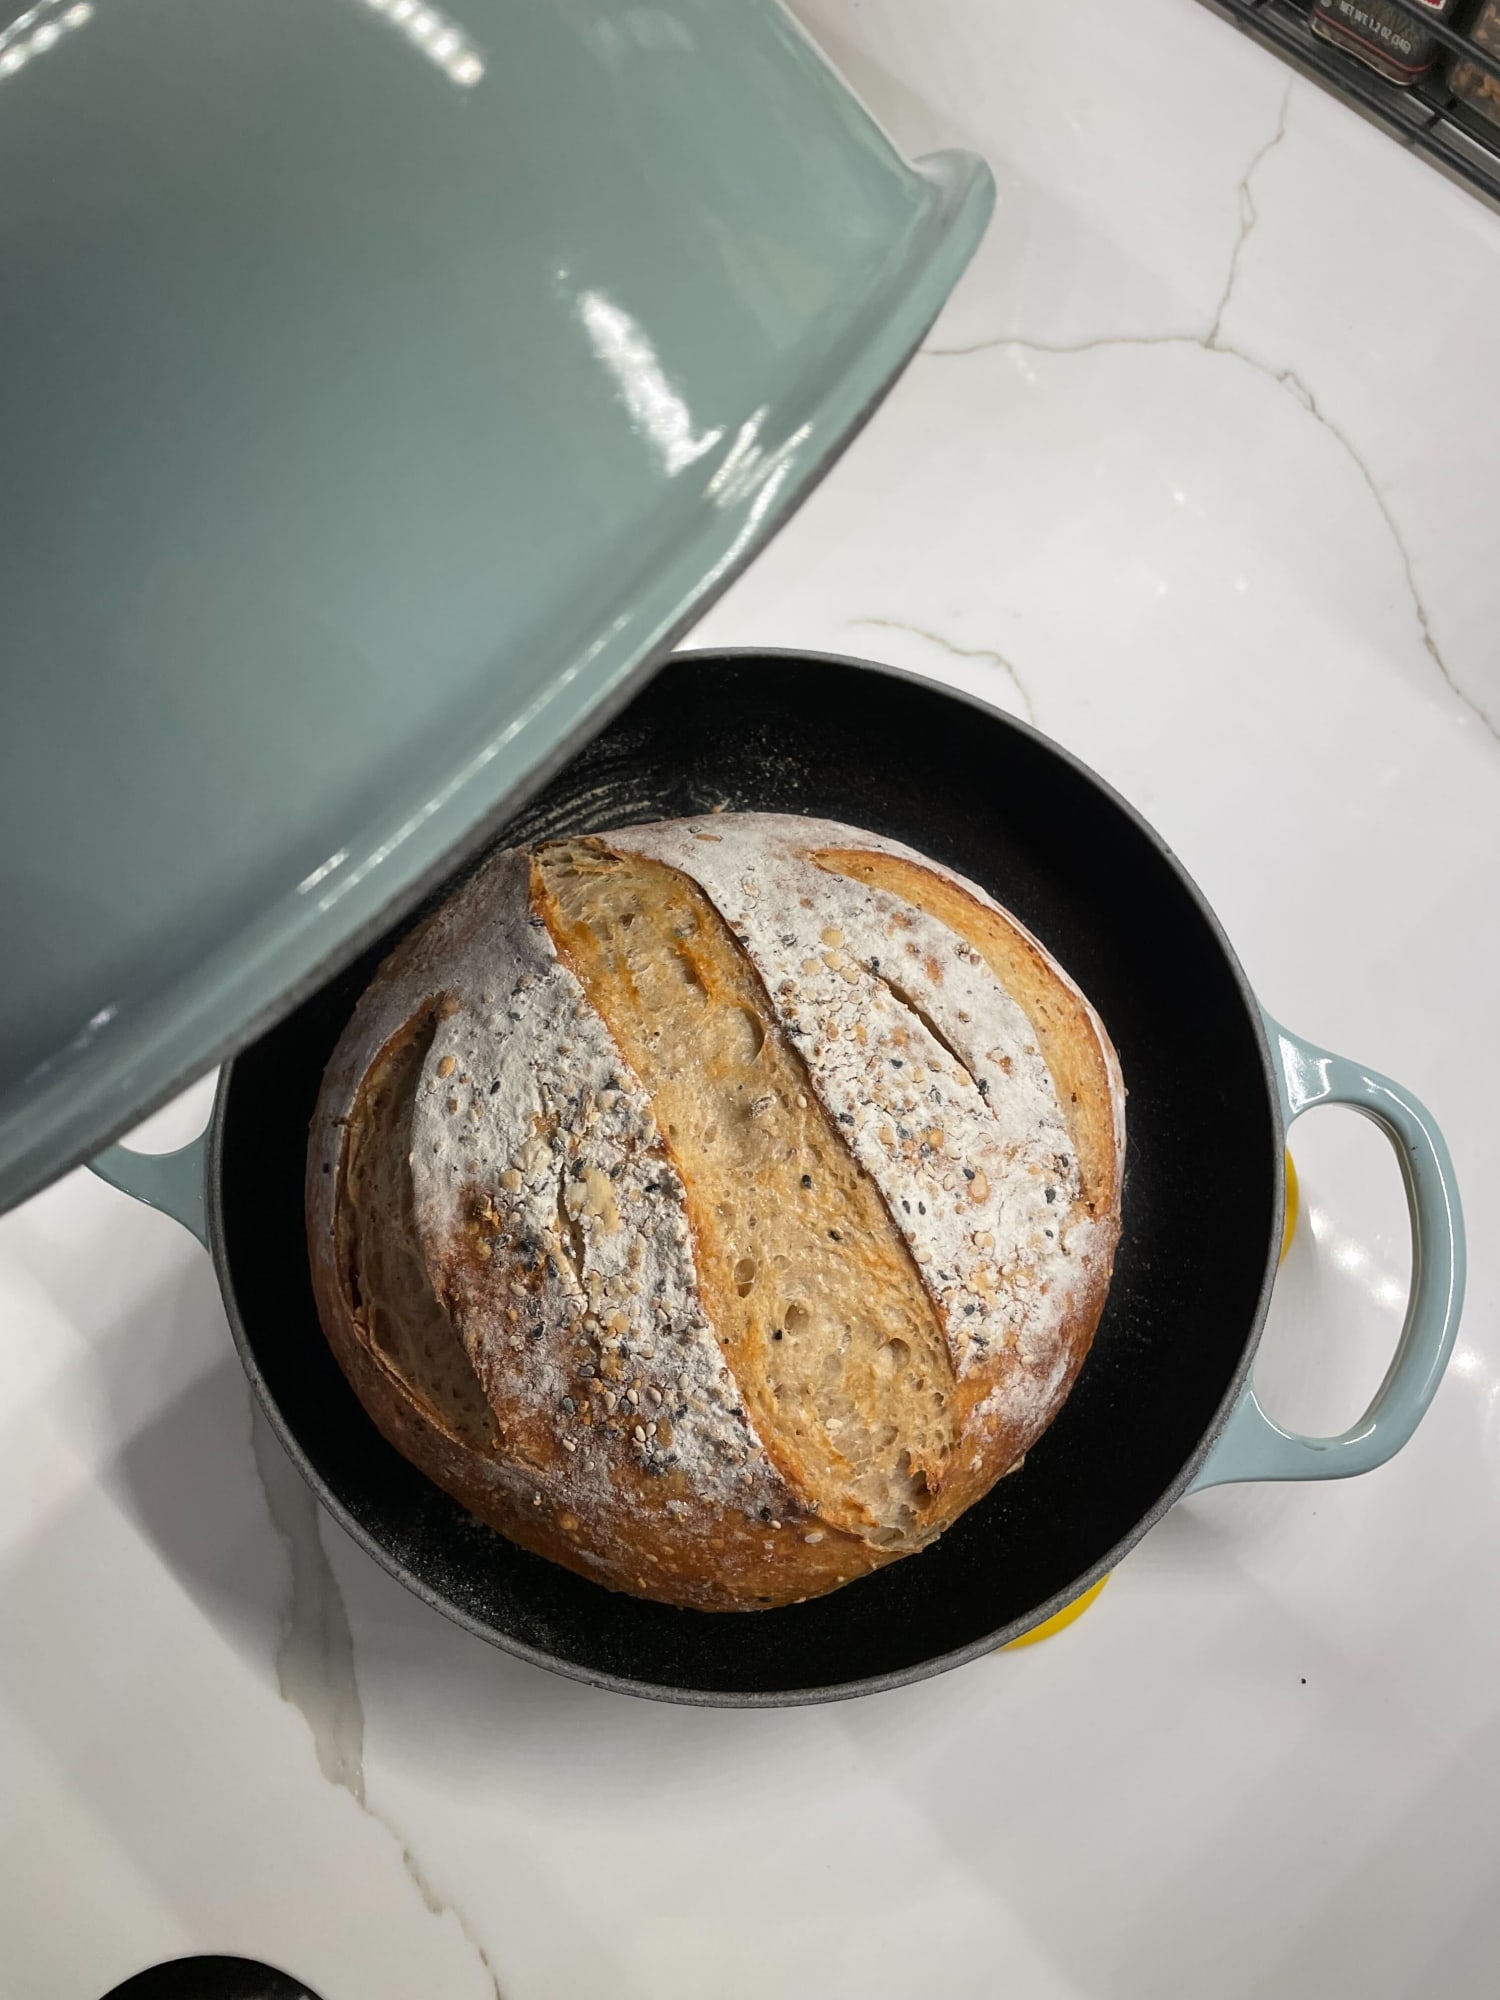 engagement Gennemvæd Dwell The Le Creuset Bread Oven offers a new way to bake loaves